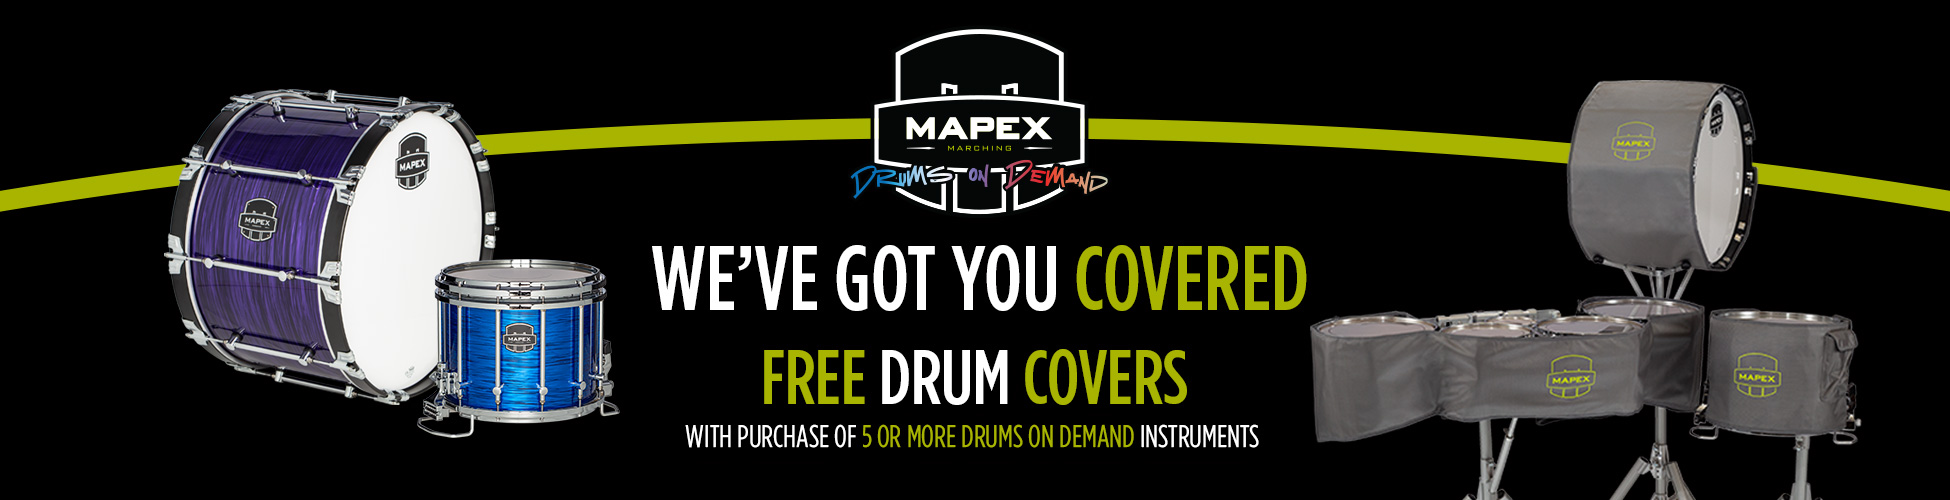 Mapex Marching Free Drum Cover Promo